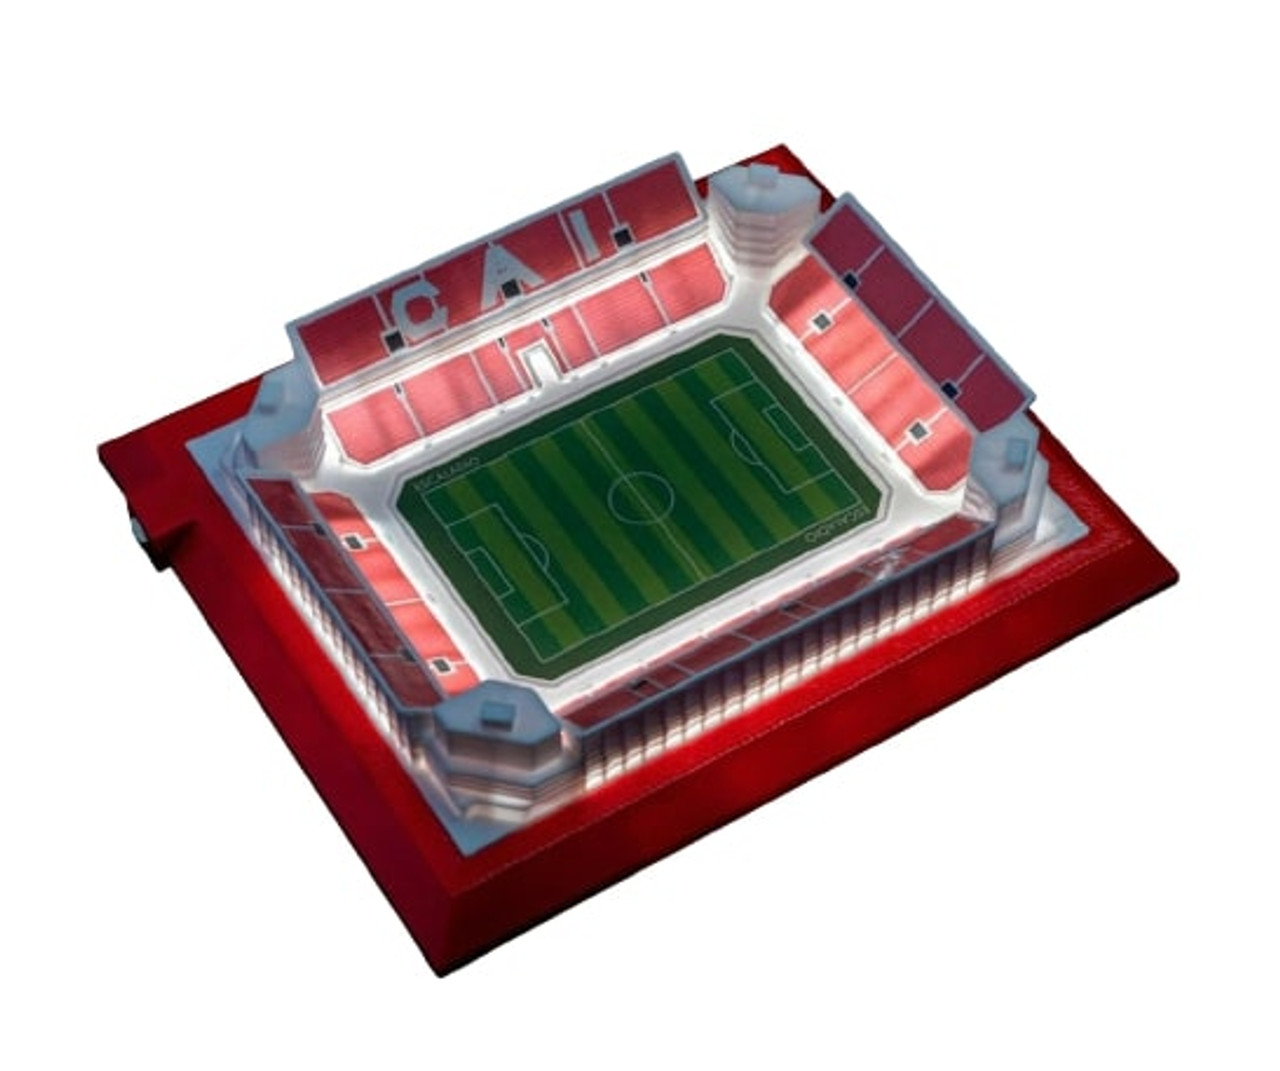 Club Atlético Independiente Greeting Card for Sale by